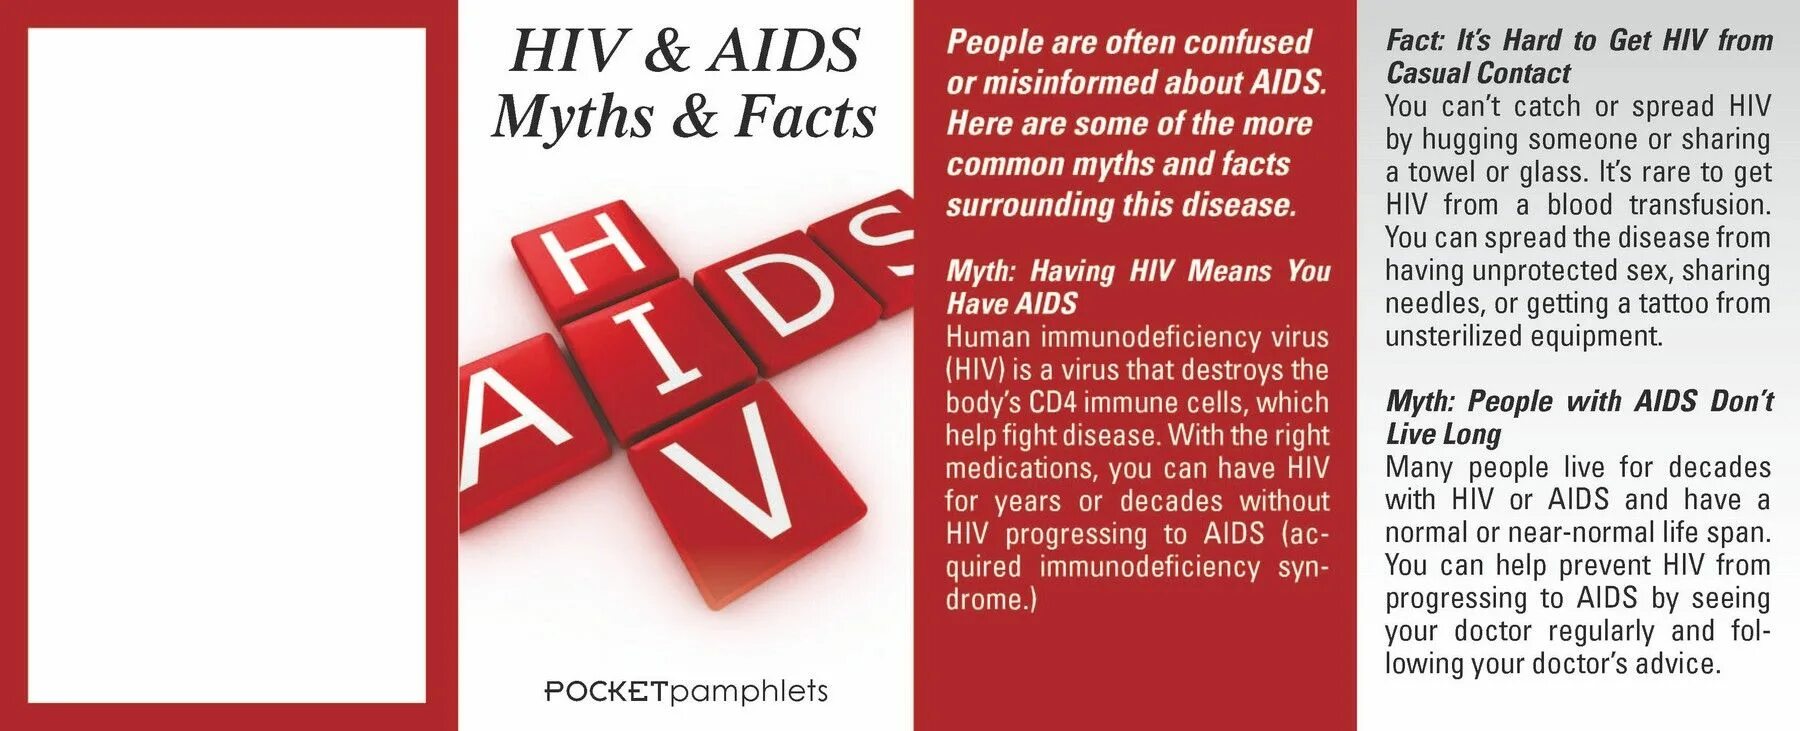 Спид ап на английском. About AIDS. HIV AIDS. Myths about HIV and AIDS. Pamphlet for HIV.